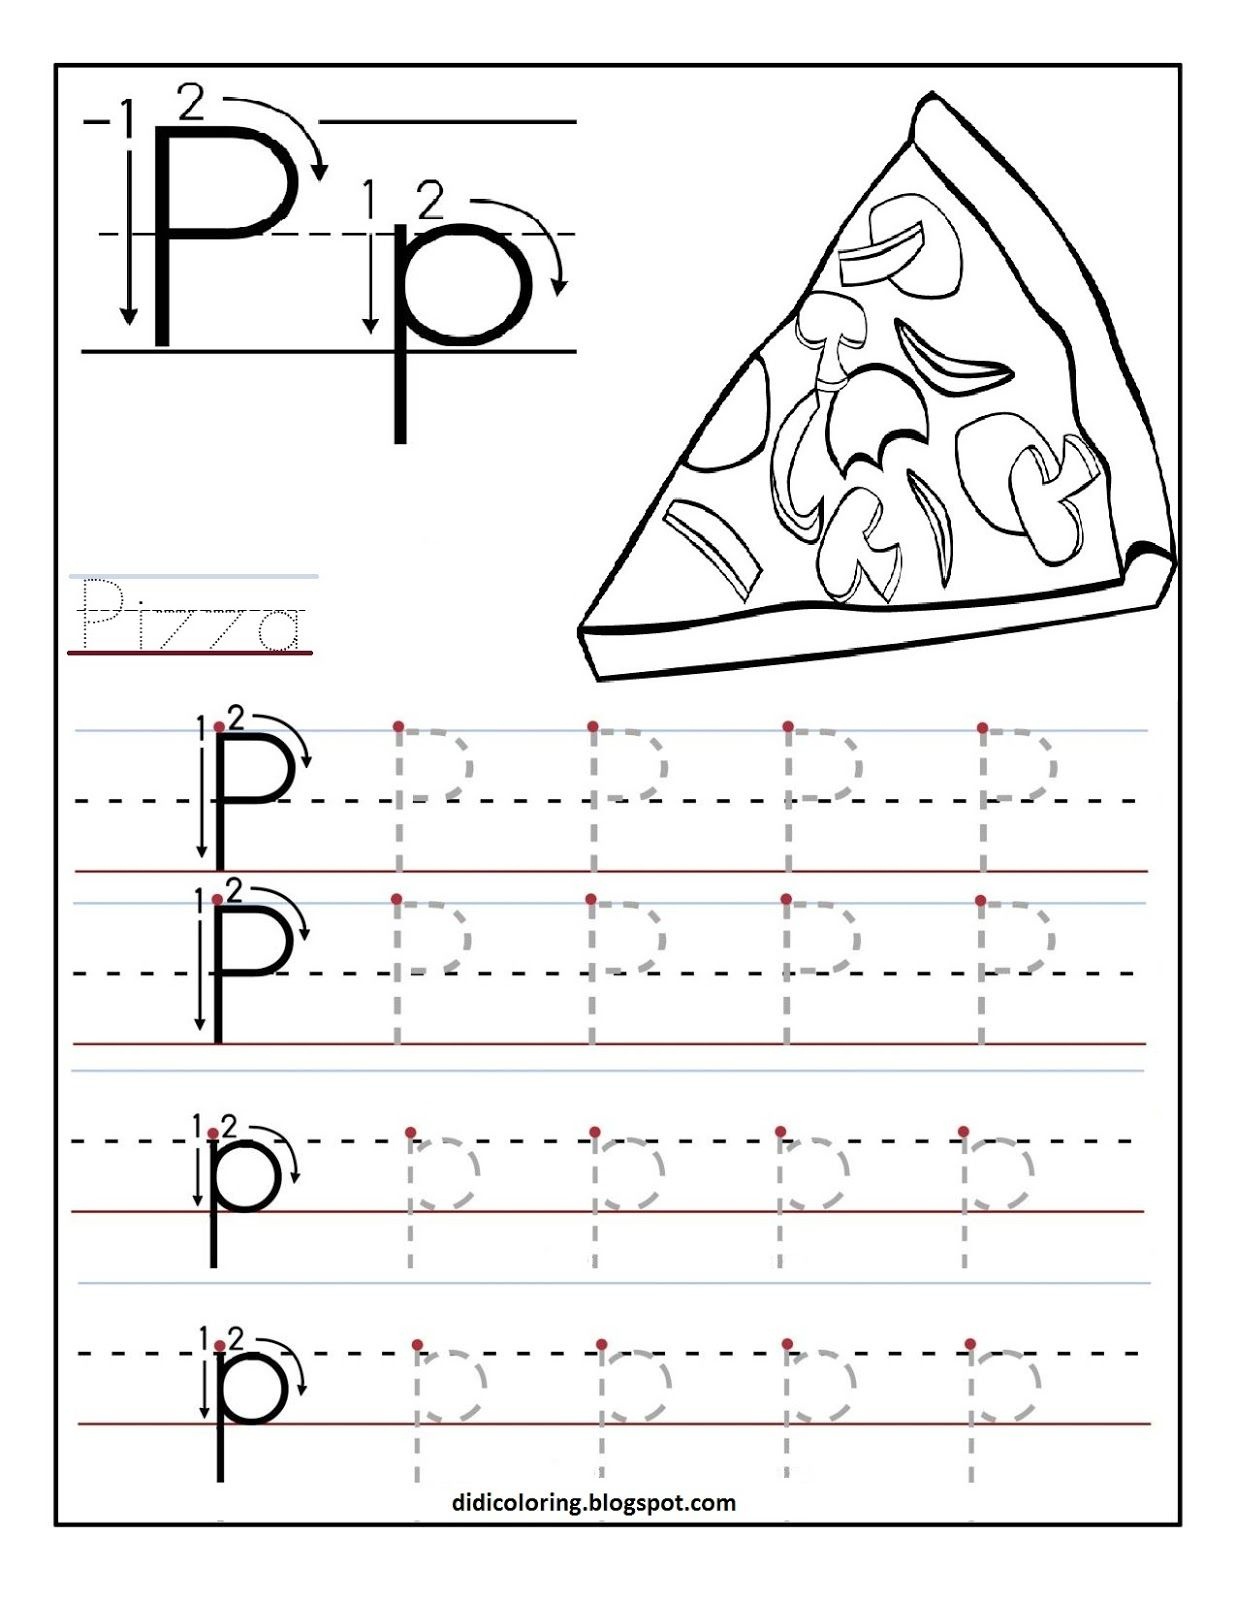 Free Printable Worksheet Letter P For Your Child To Learn And Write - Learning To Write Letters Free Printables